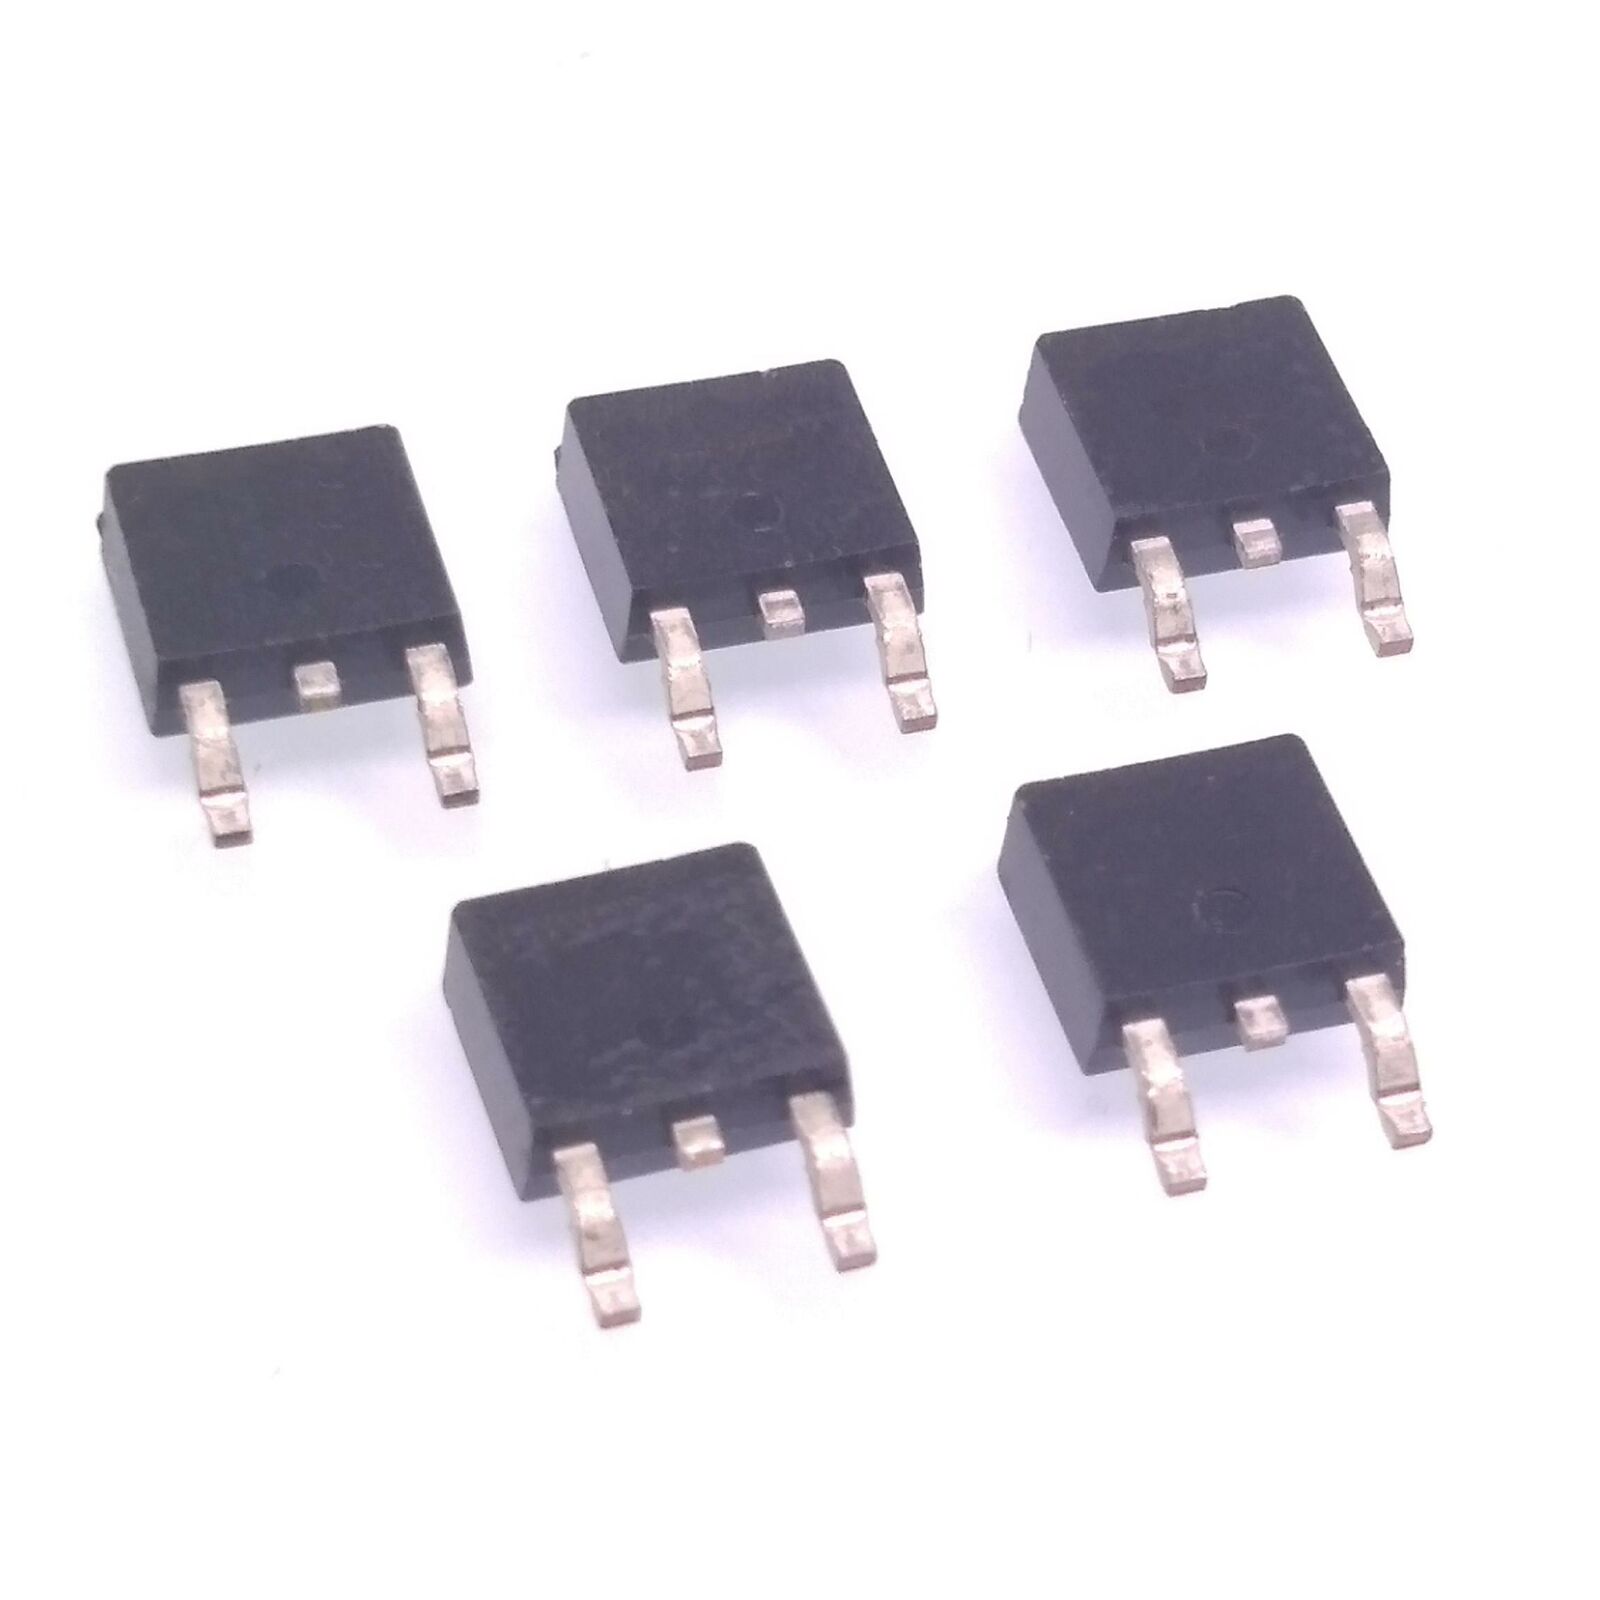 5pcs FGD4536 PDP Power MOSFET 300V 50A TO-252